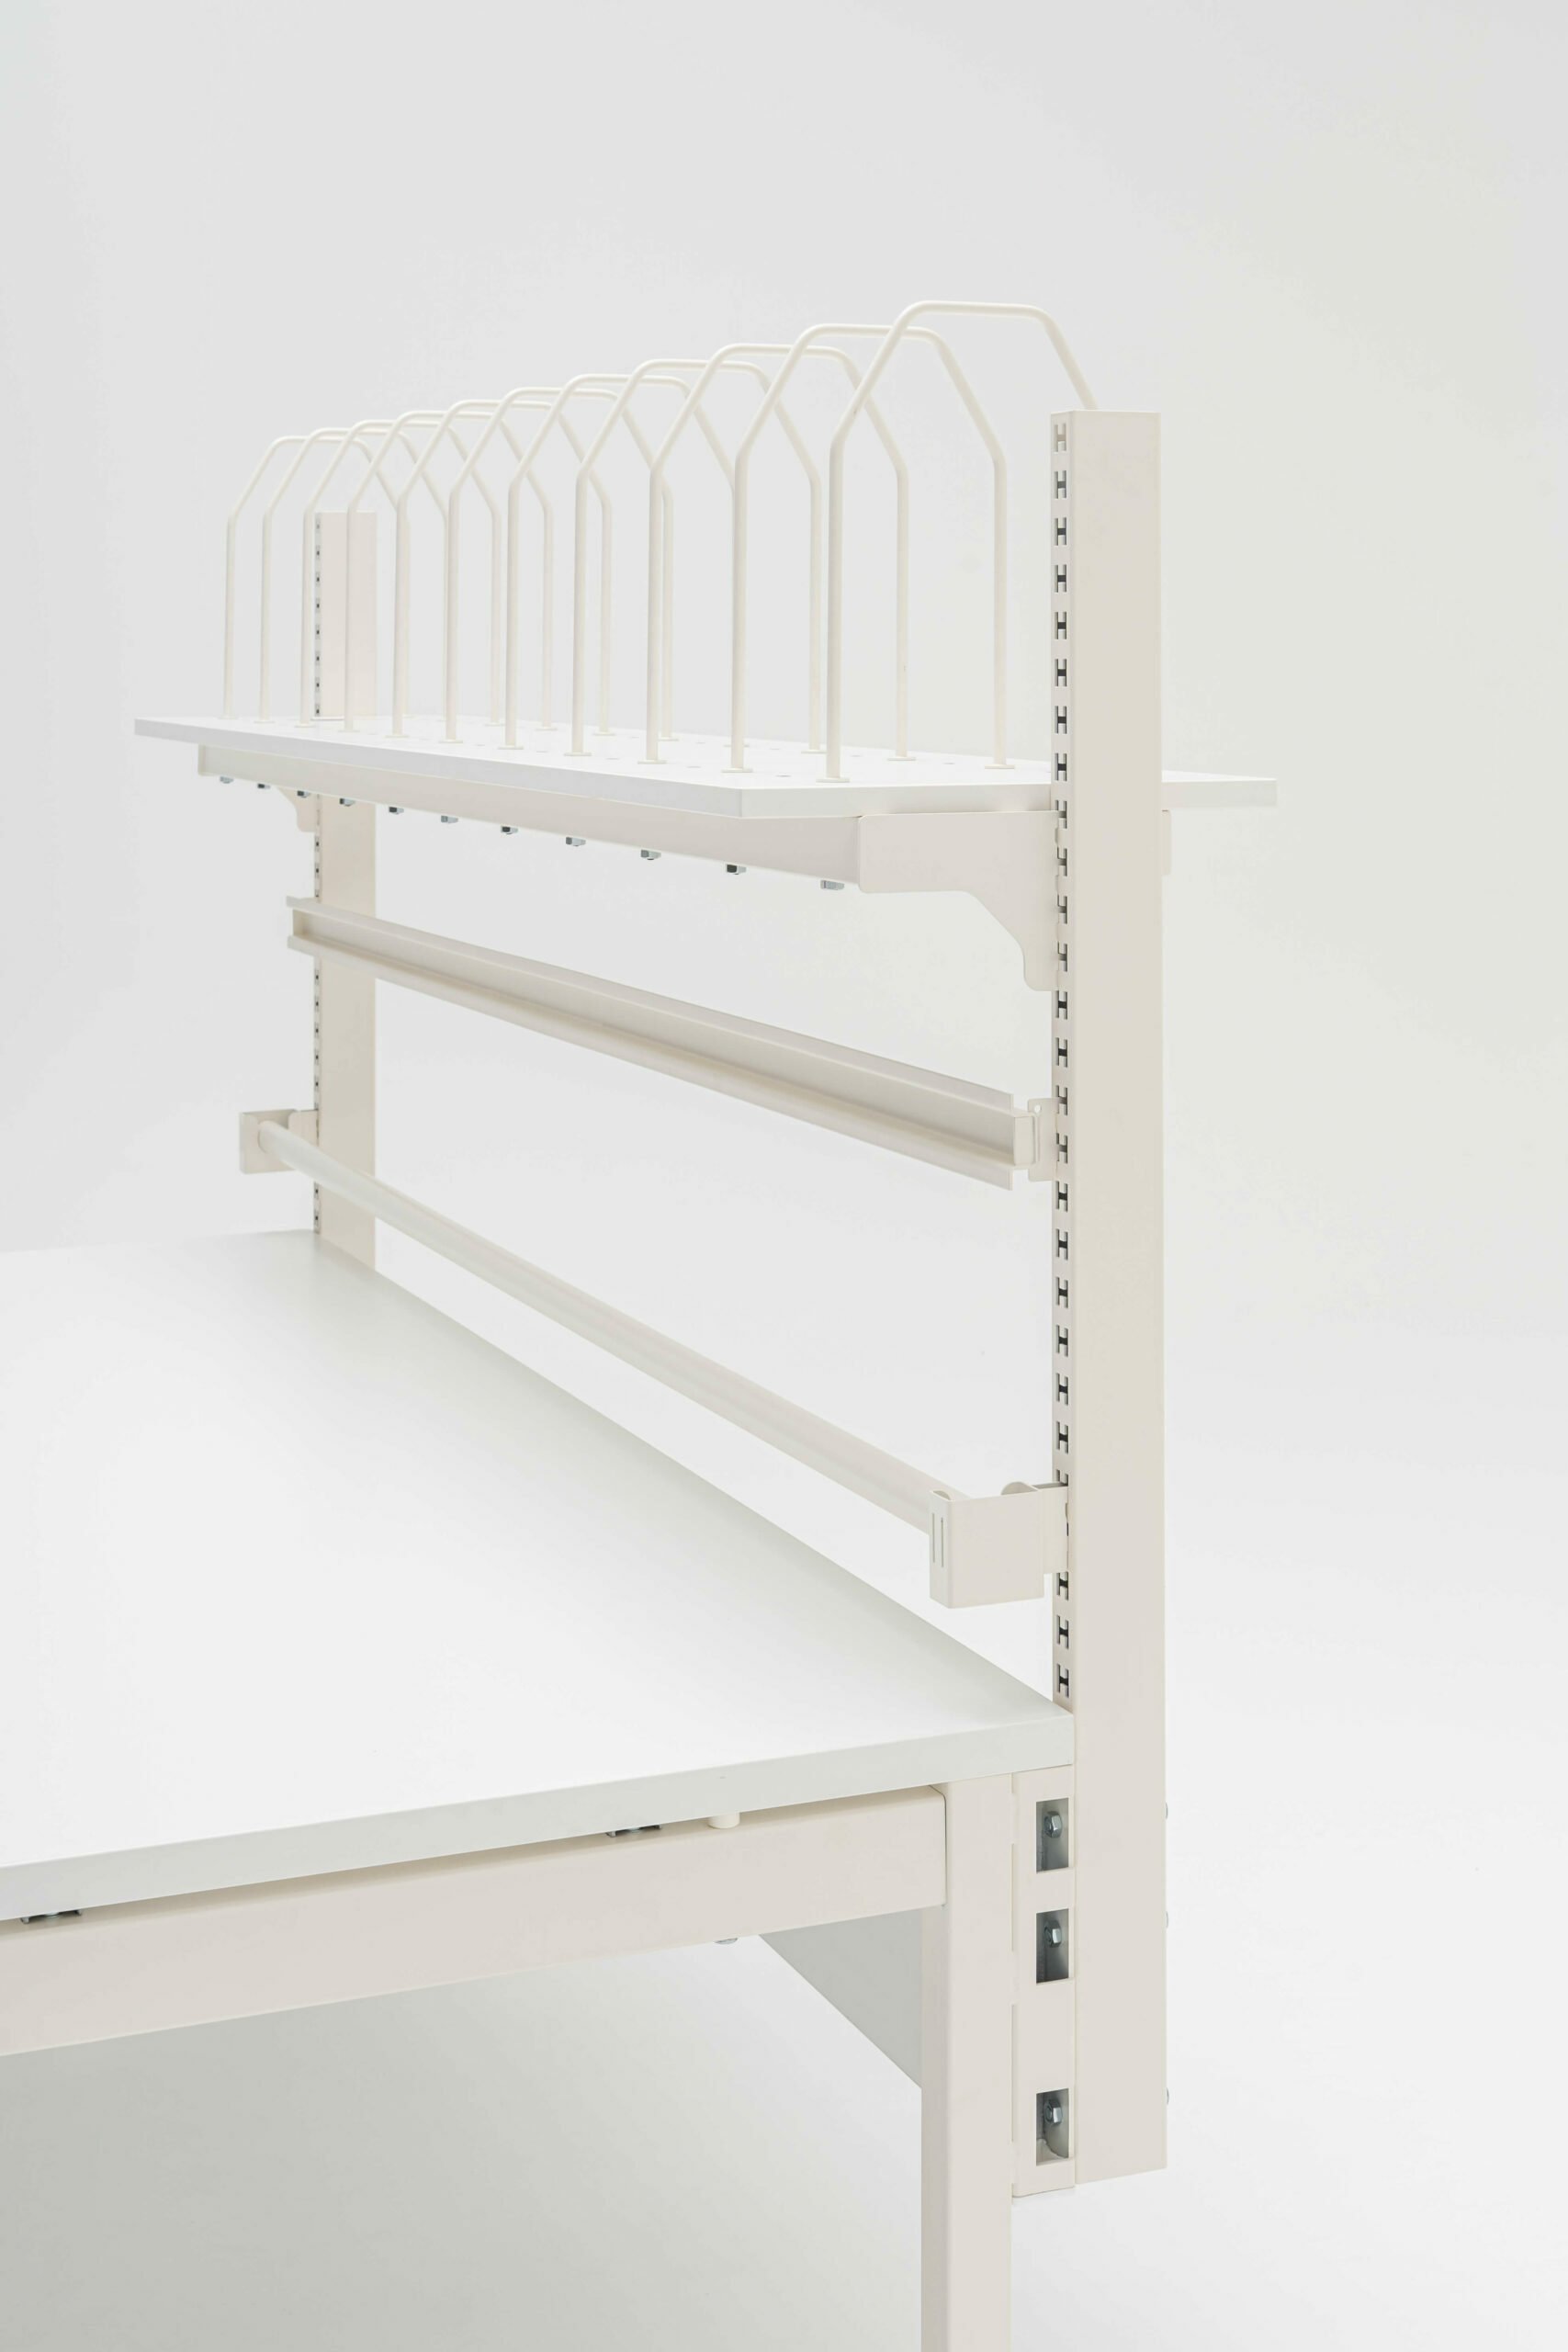 A shelf with partitions for storing goods